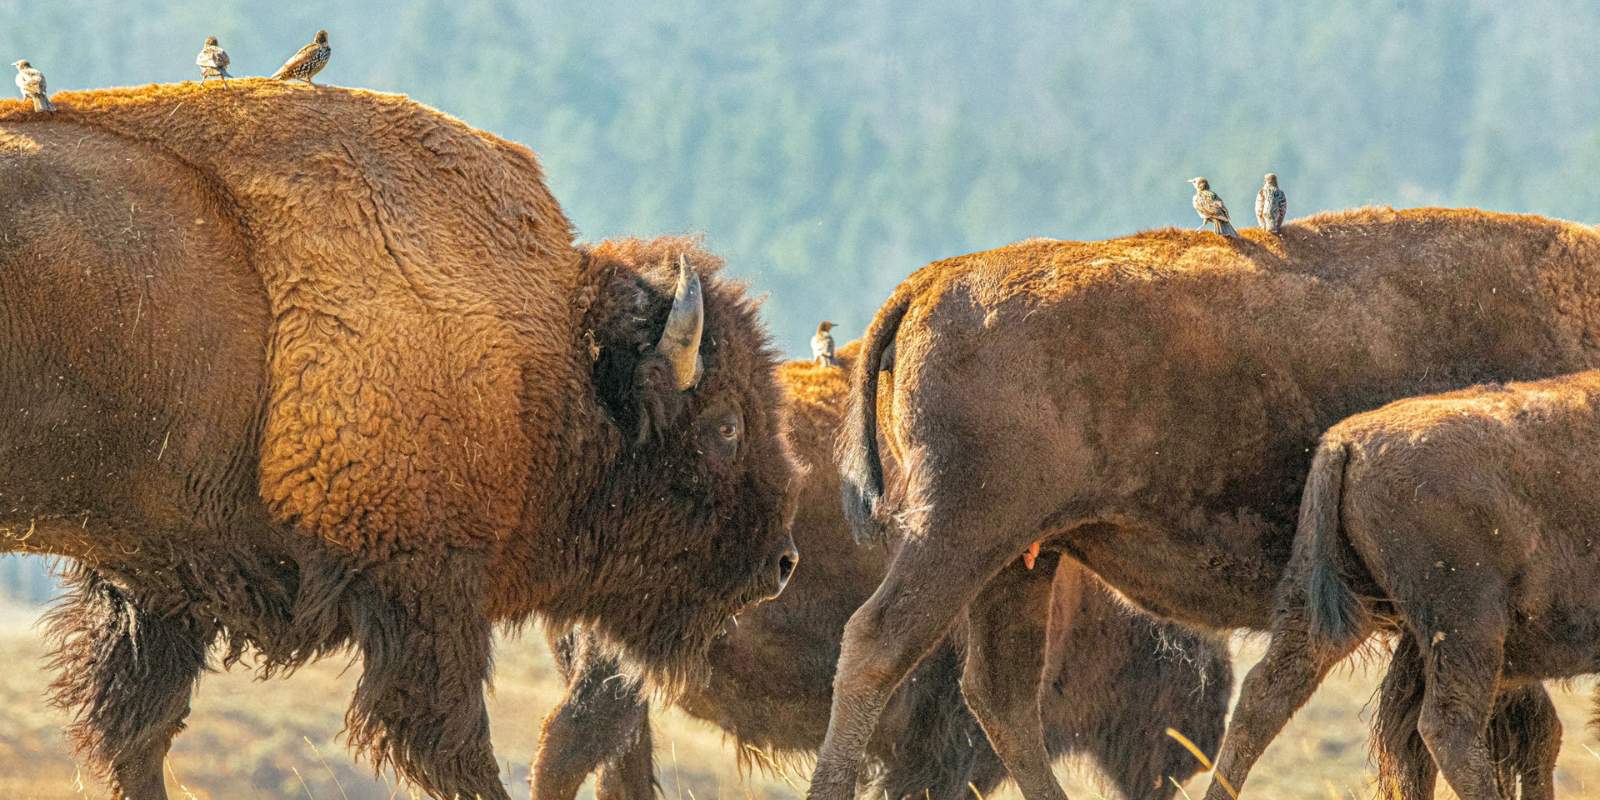 Photo by Hari Nanakumar of a buffalo walking through landscape with birds on their backs | For The Wild Podcast